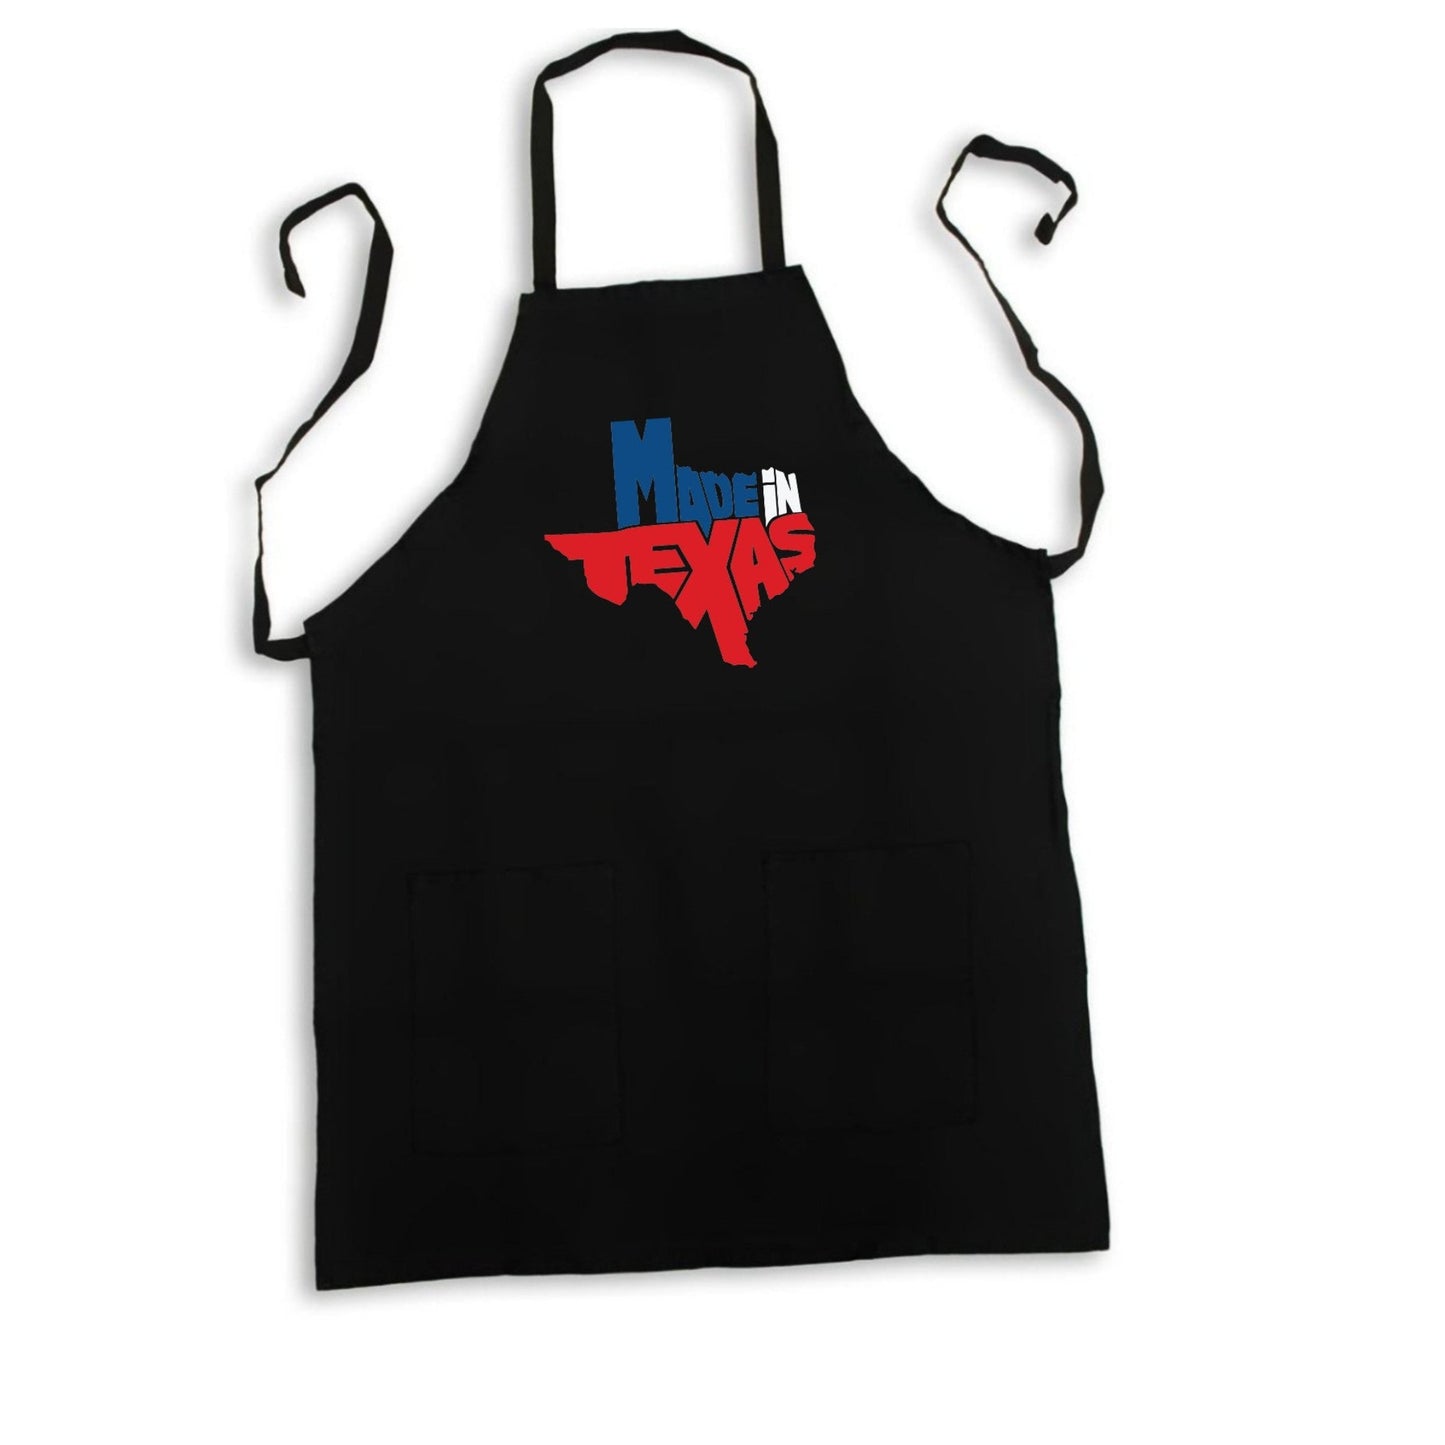 Made in Texas Apron